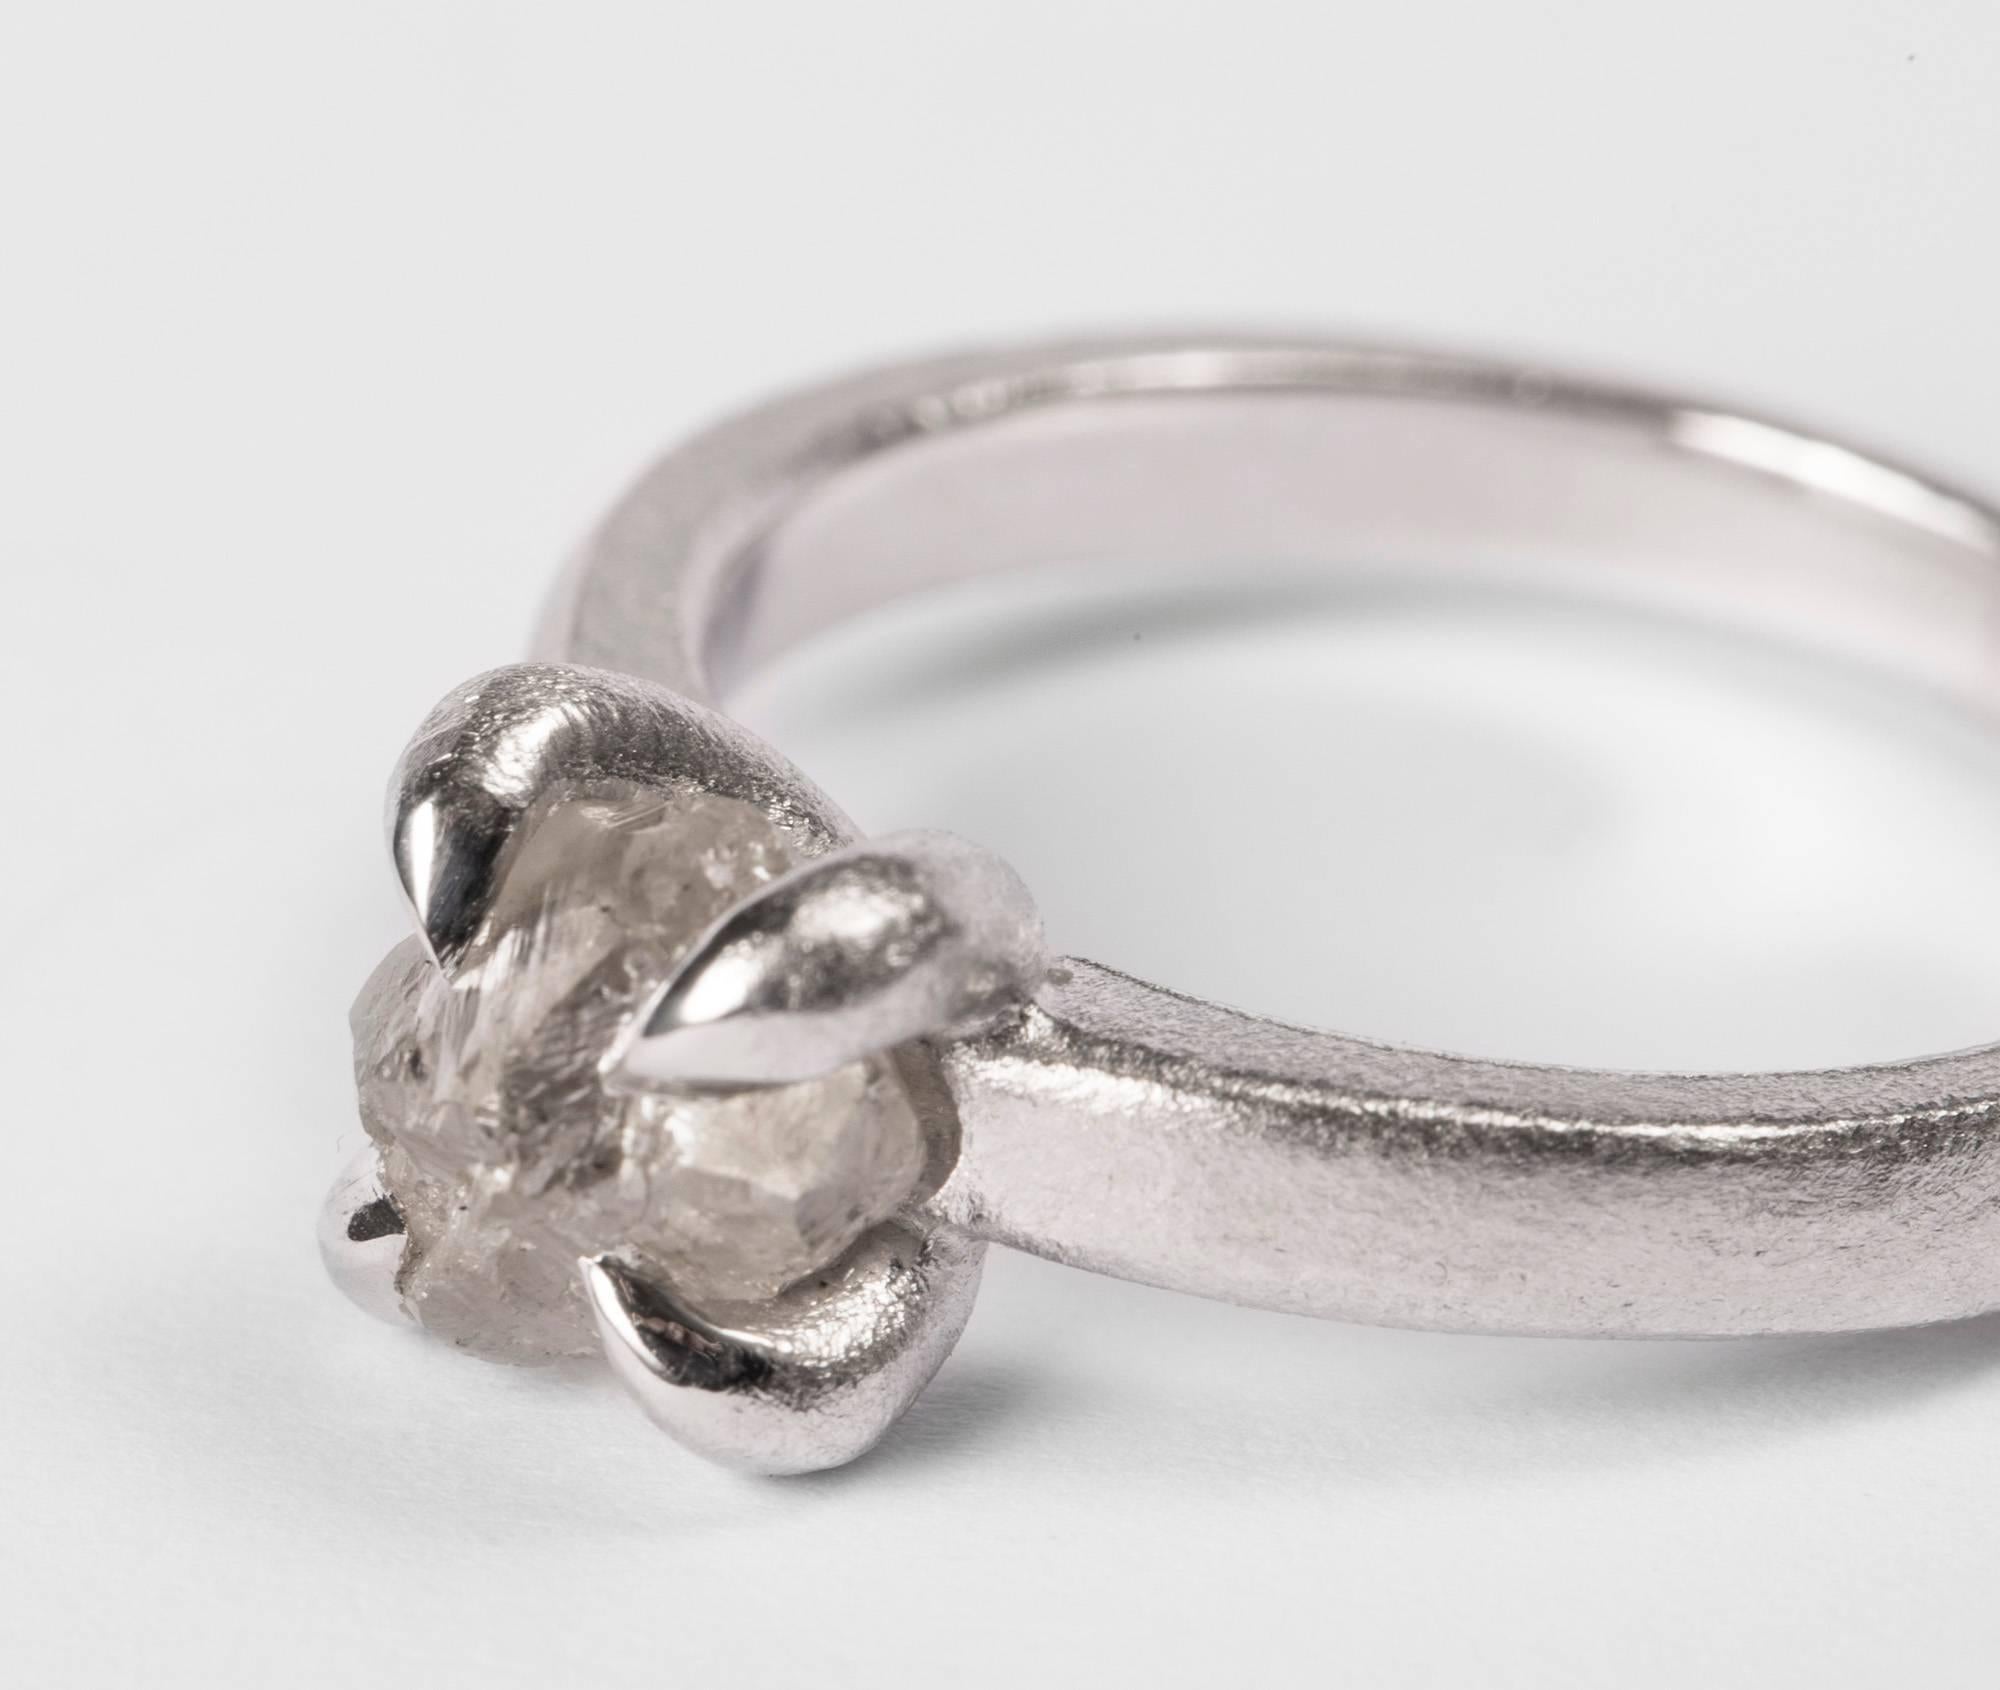 1.84 ct. Natural Whitish Rough Diamond in 14K handcrafted white gold ring.

Origin of Diamond: Williamson Mine, Tanzania

Every rough diamond from Roughdiamonds dk has been personally handpicked by Maya Bjørnsten. The diamonds we reject are sent